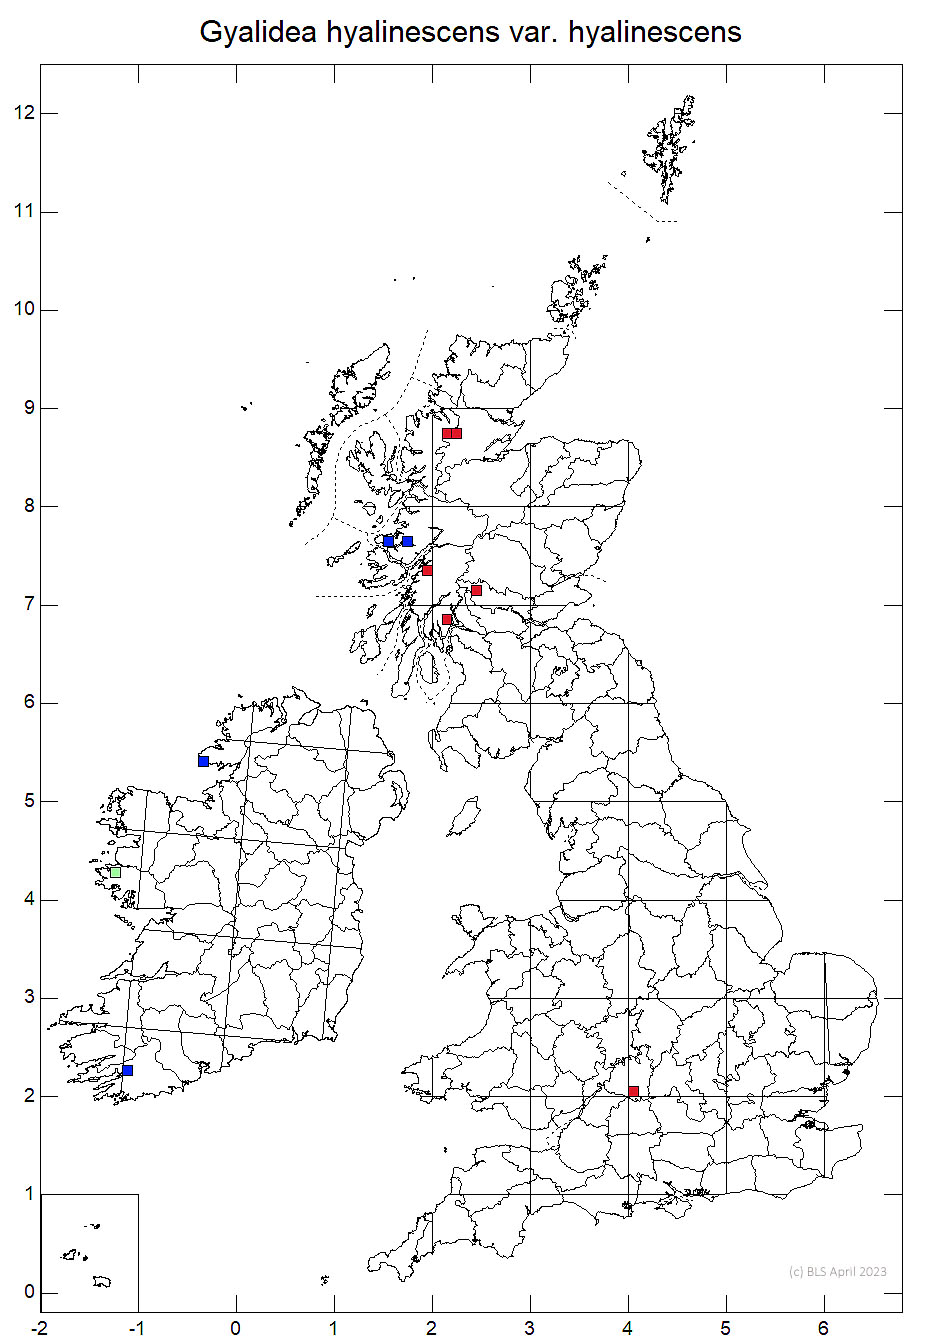 Gyalidea hyalinescens var. hyalinescens 10km sq distribution map